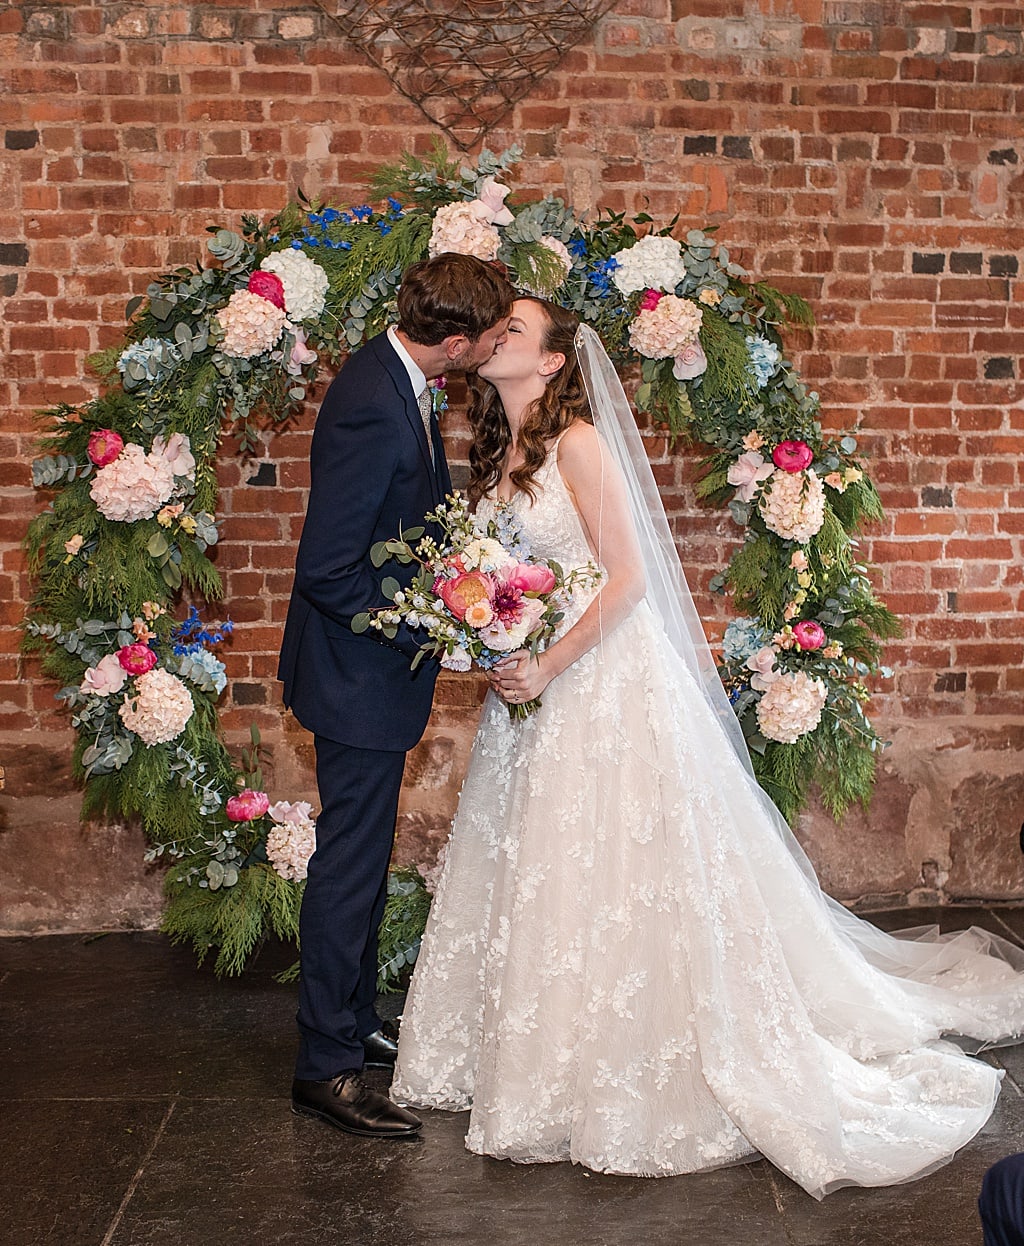 Bride and Groom share a first married kiss standing in front of a circular backdrop of flowers